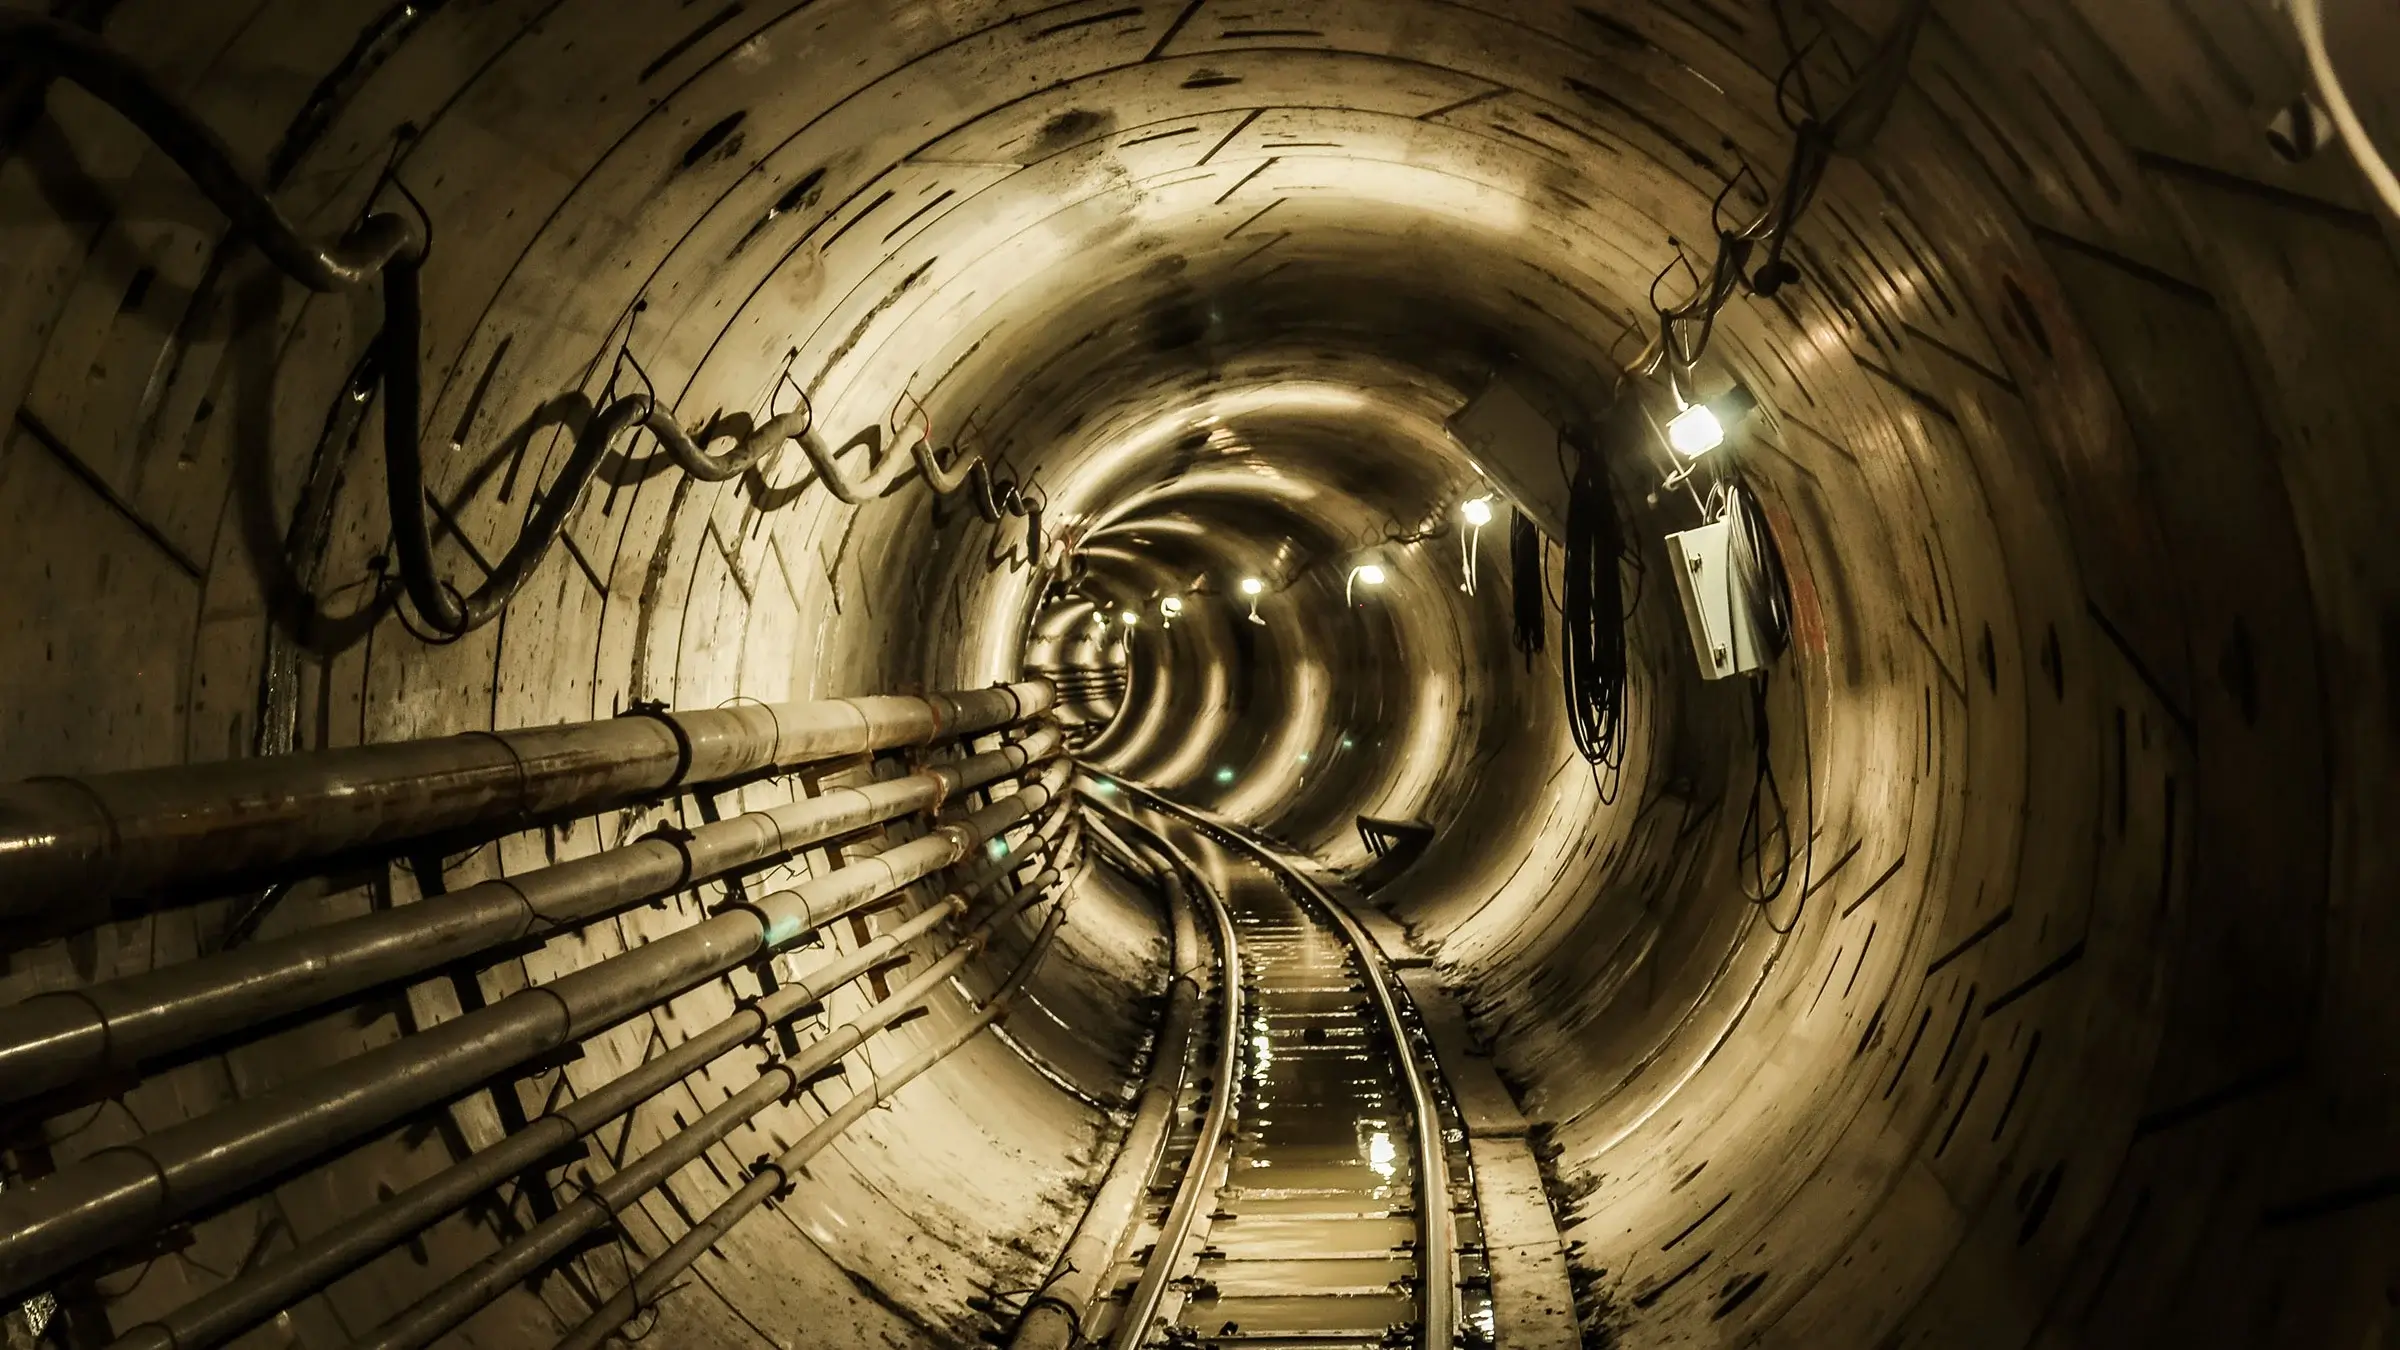 Sewer pipes running along a lighted underground tunnel